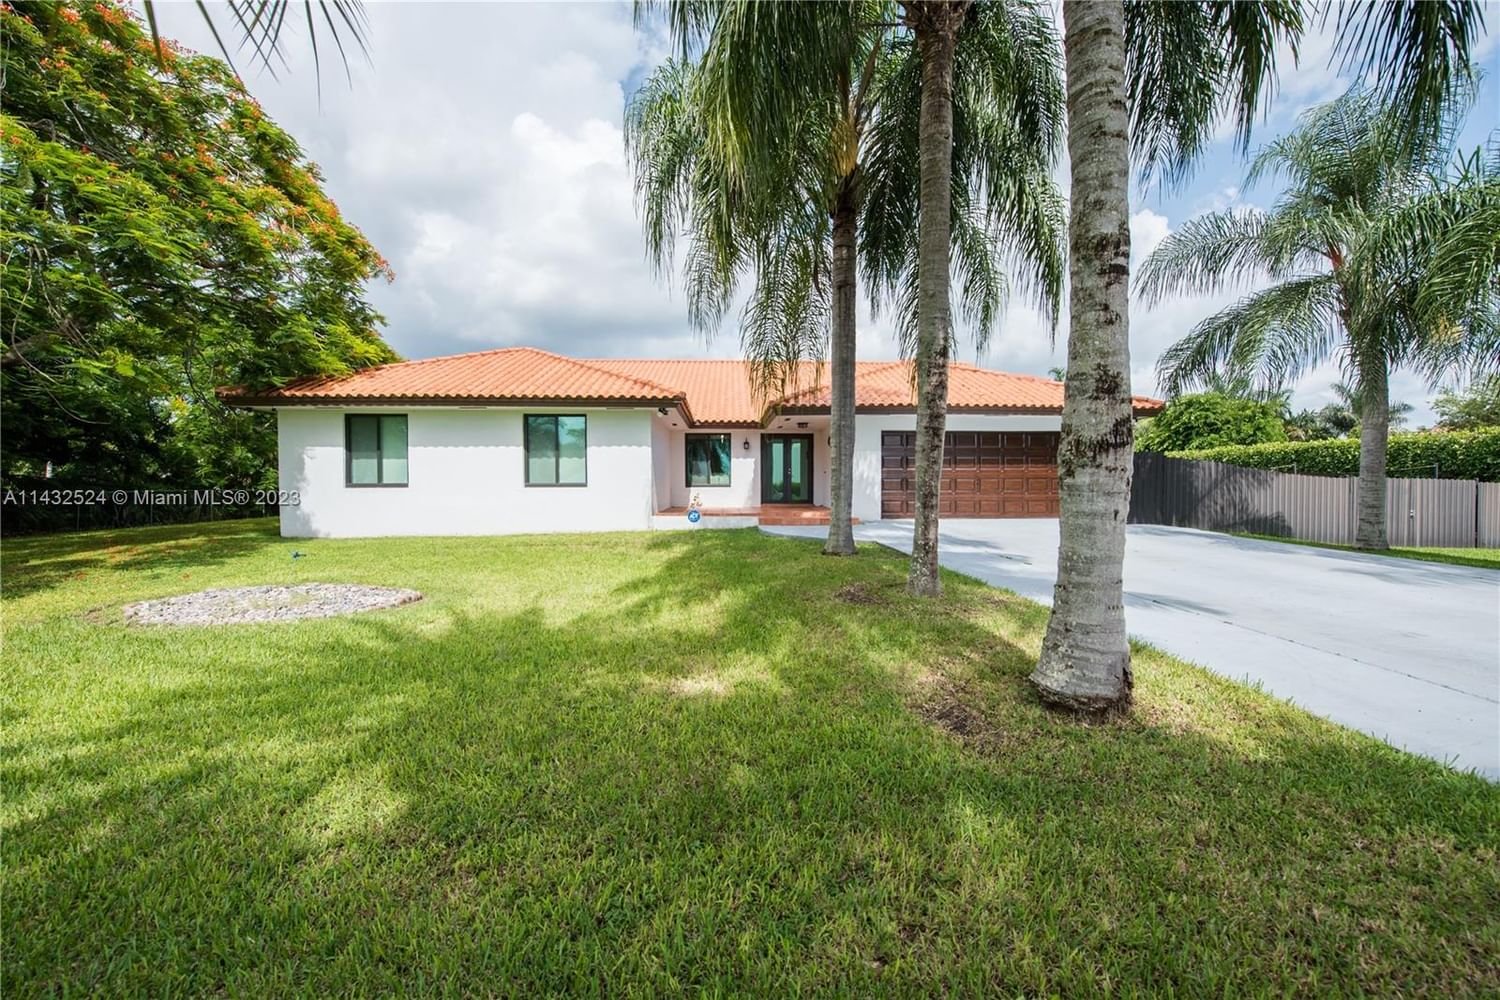 Real estate property located at 24611 217th Ave, Miami-Dade County, Redland, Homestead, FL